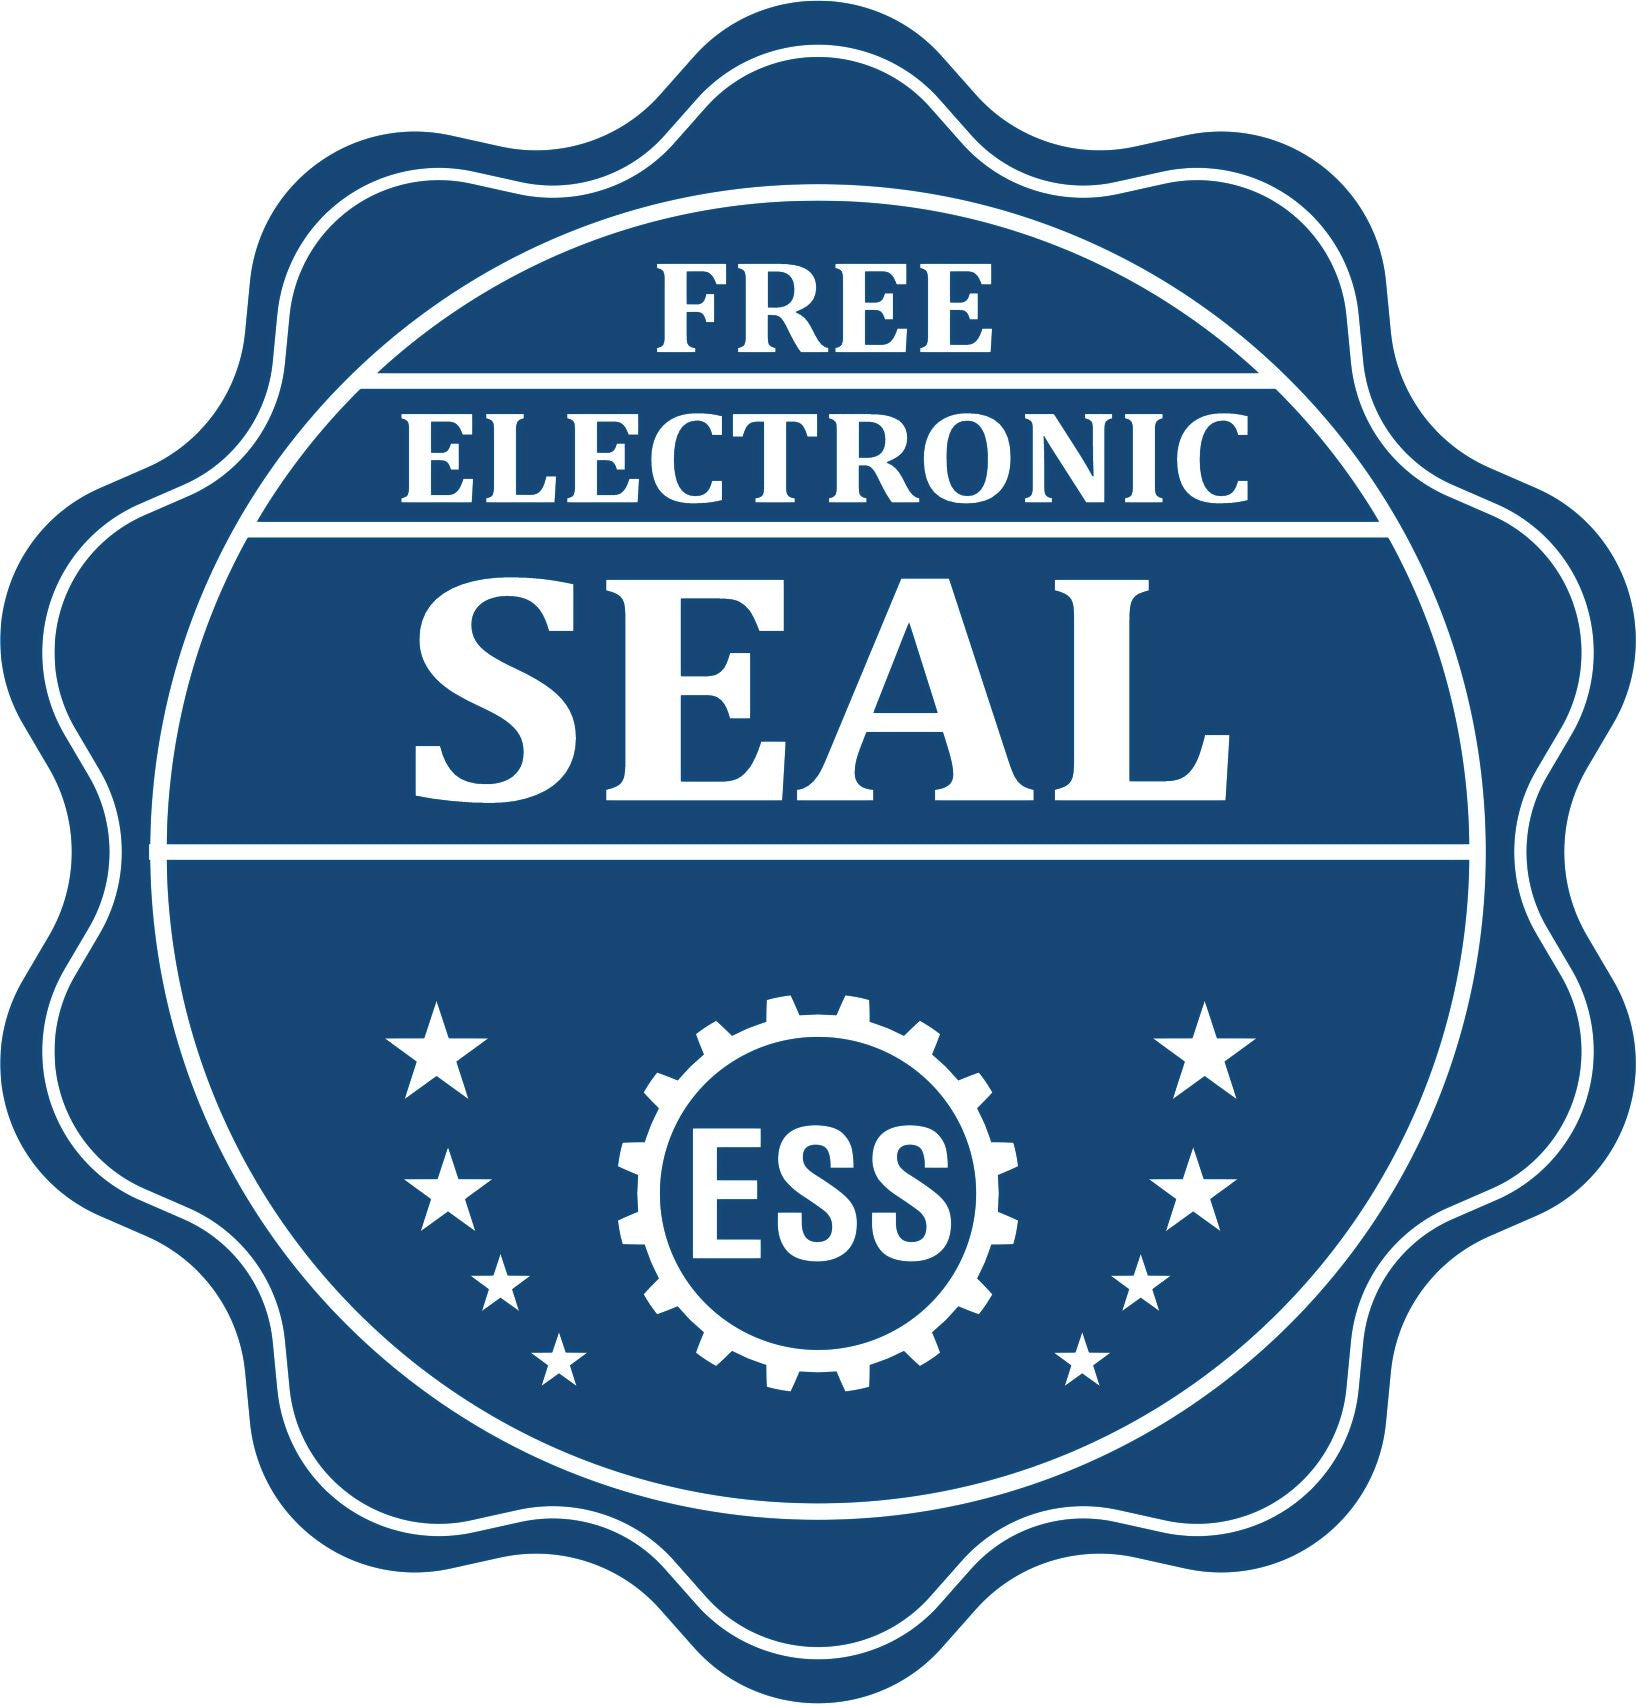 A badge showing a free electronic seal for the Wooden Handle New York State Seal Notary Public Stamp with stars and the ESS gear on the emblem.